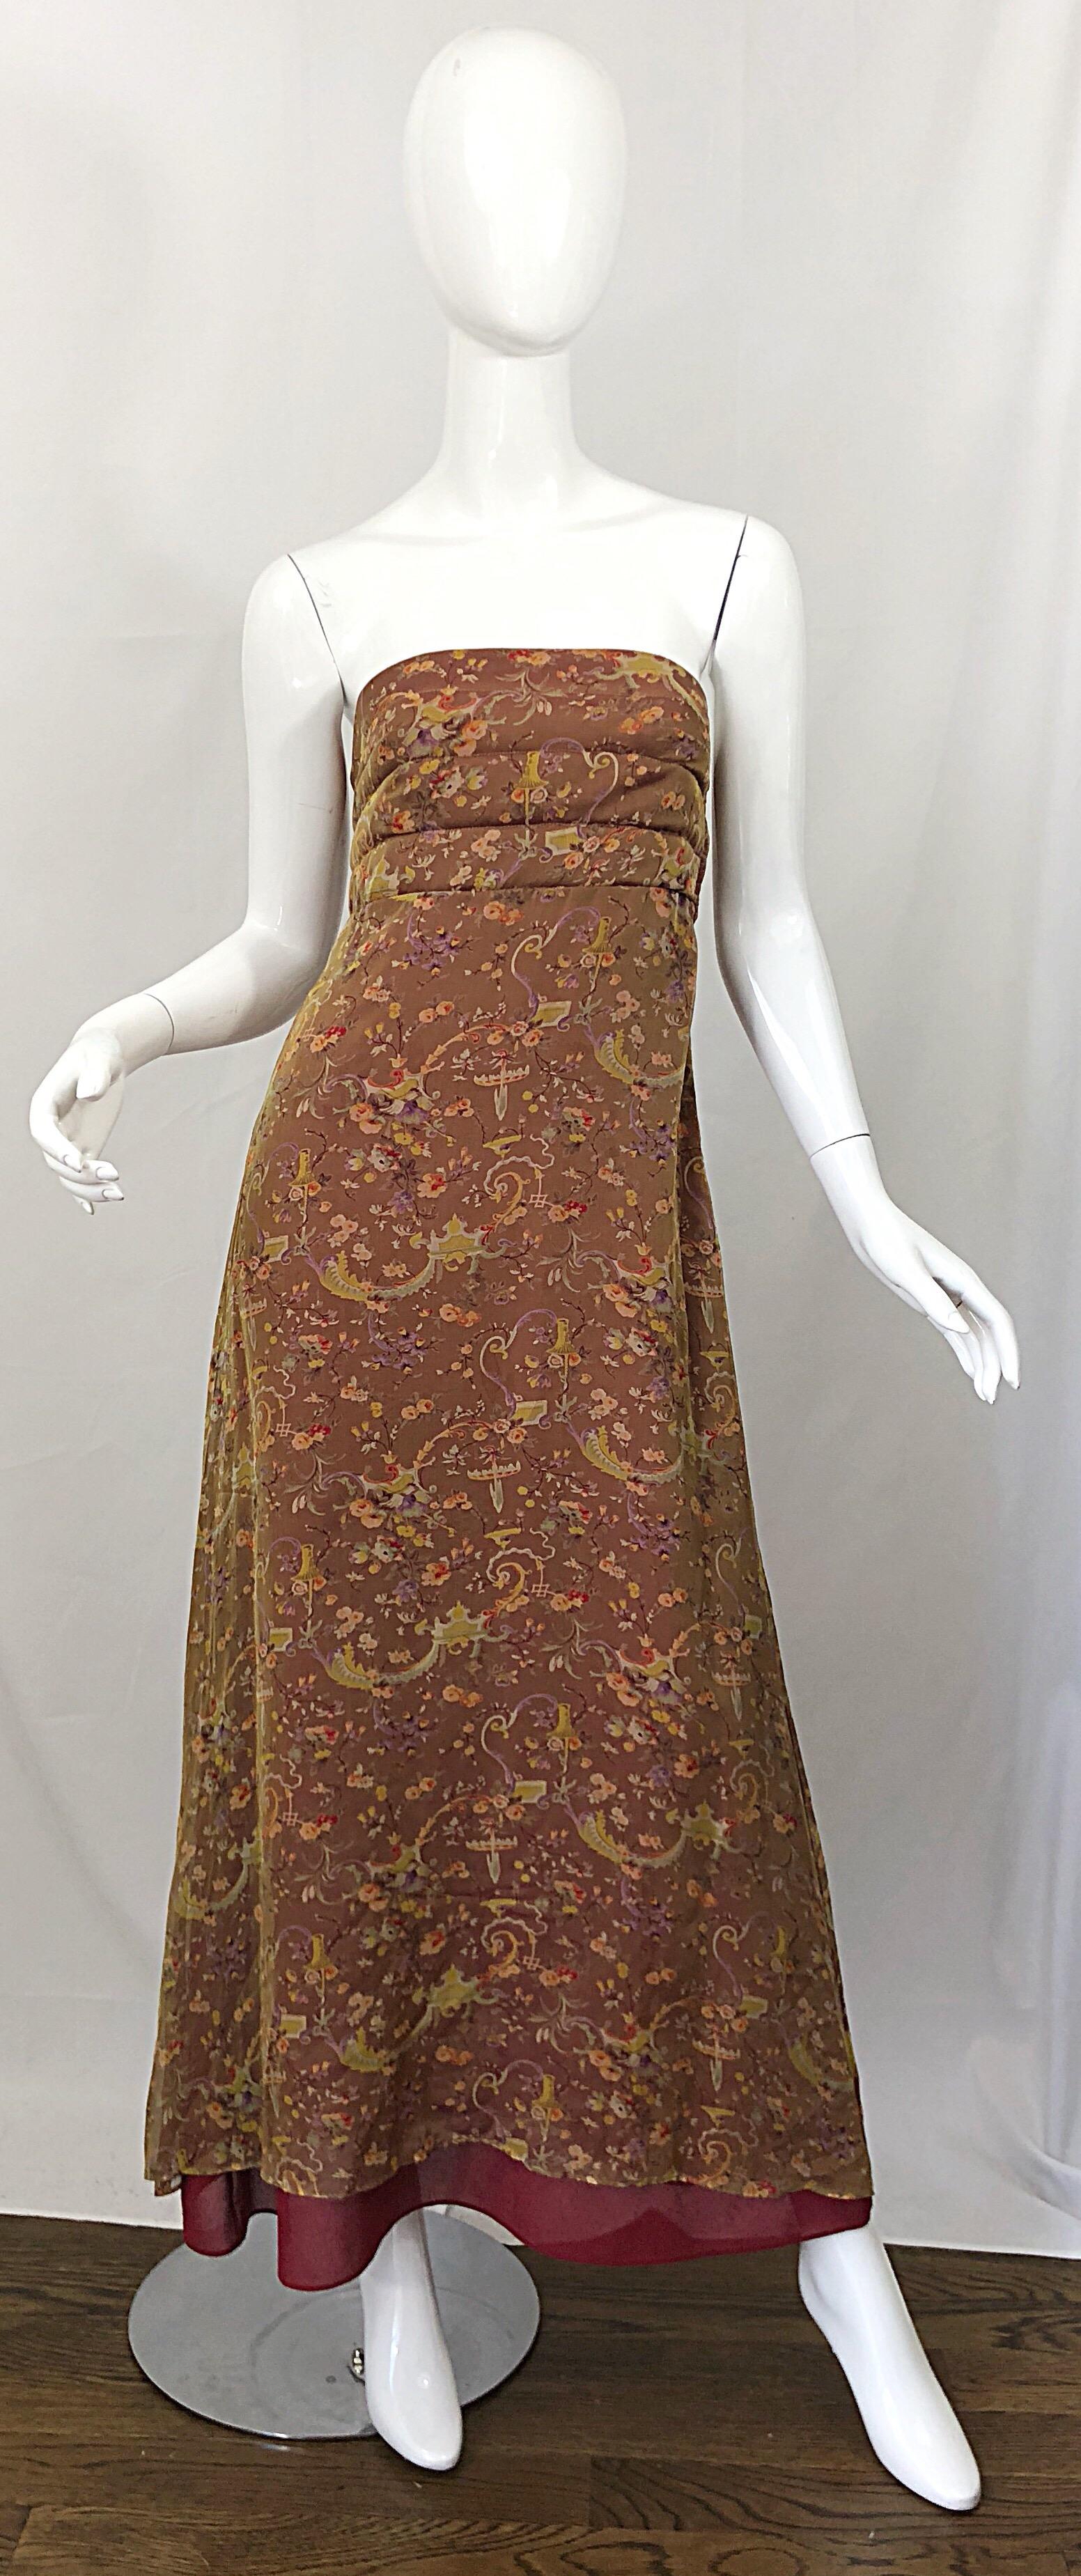 Romantic mid 1990s novelty garden print strapless silk chiffon maxi dress gown! Features a tan iridescent chiffon over a maroon silk underlay. Pretty garden themed print, with lamps printed throughout. Warm colors of brown, red, yellow, orange and